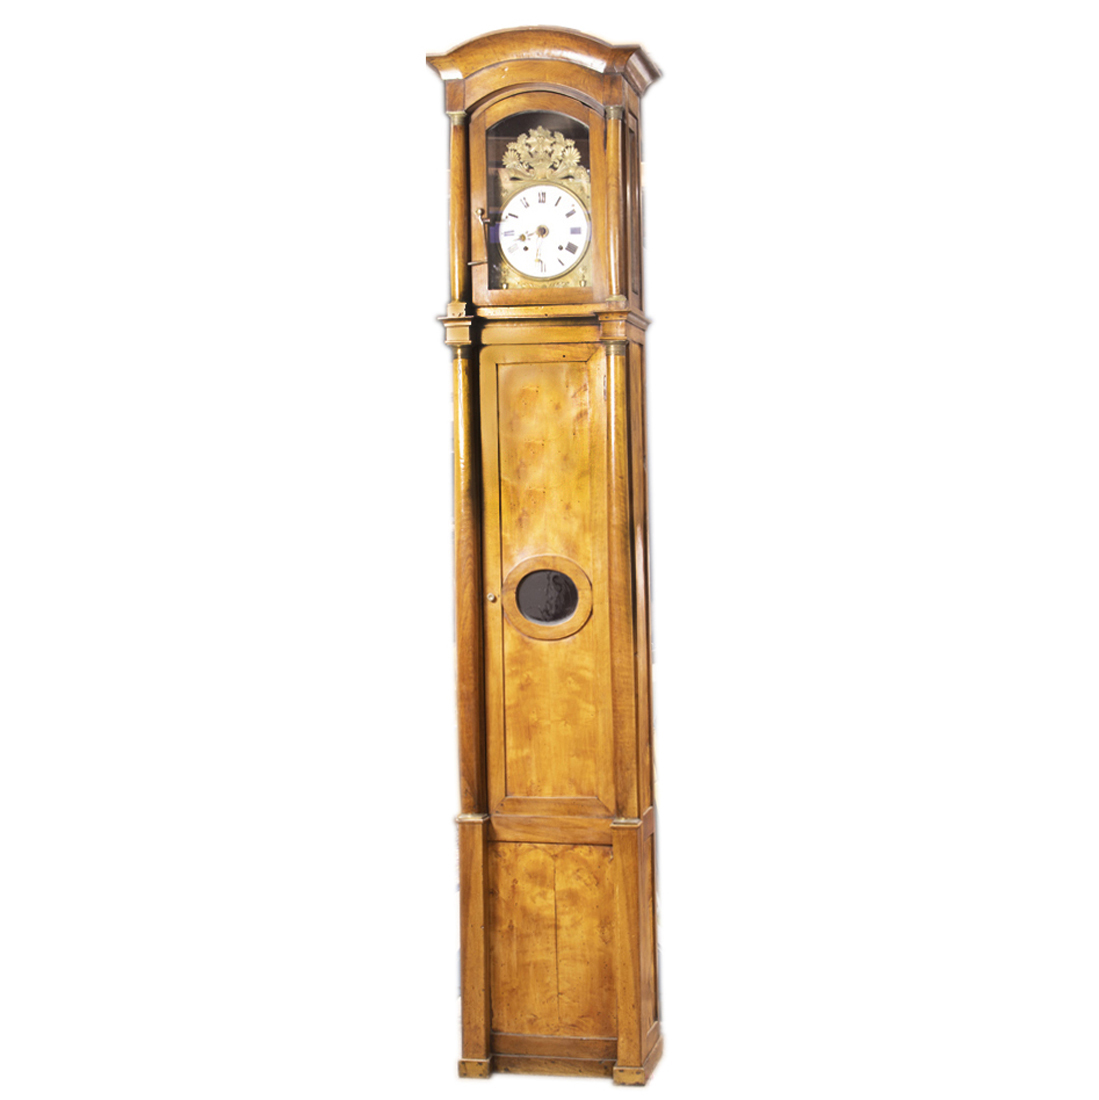 A FRENCH TALL CASE CLOCK A French 3cda61